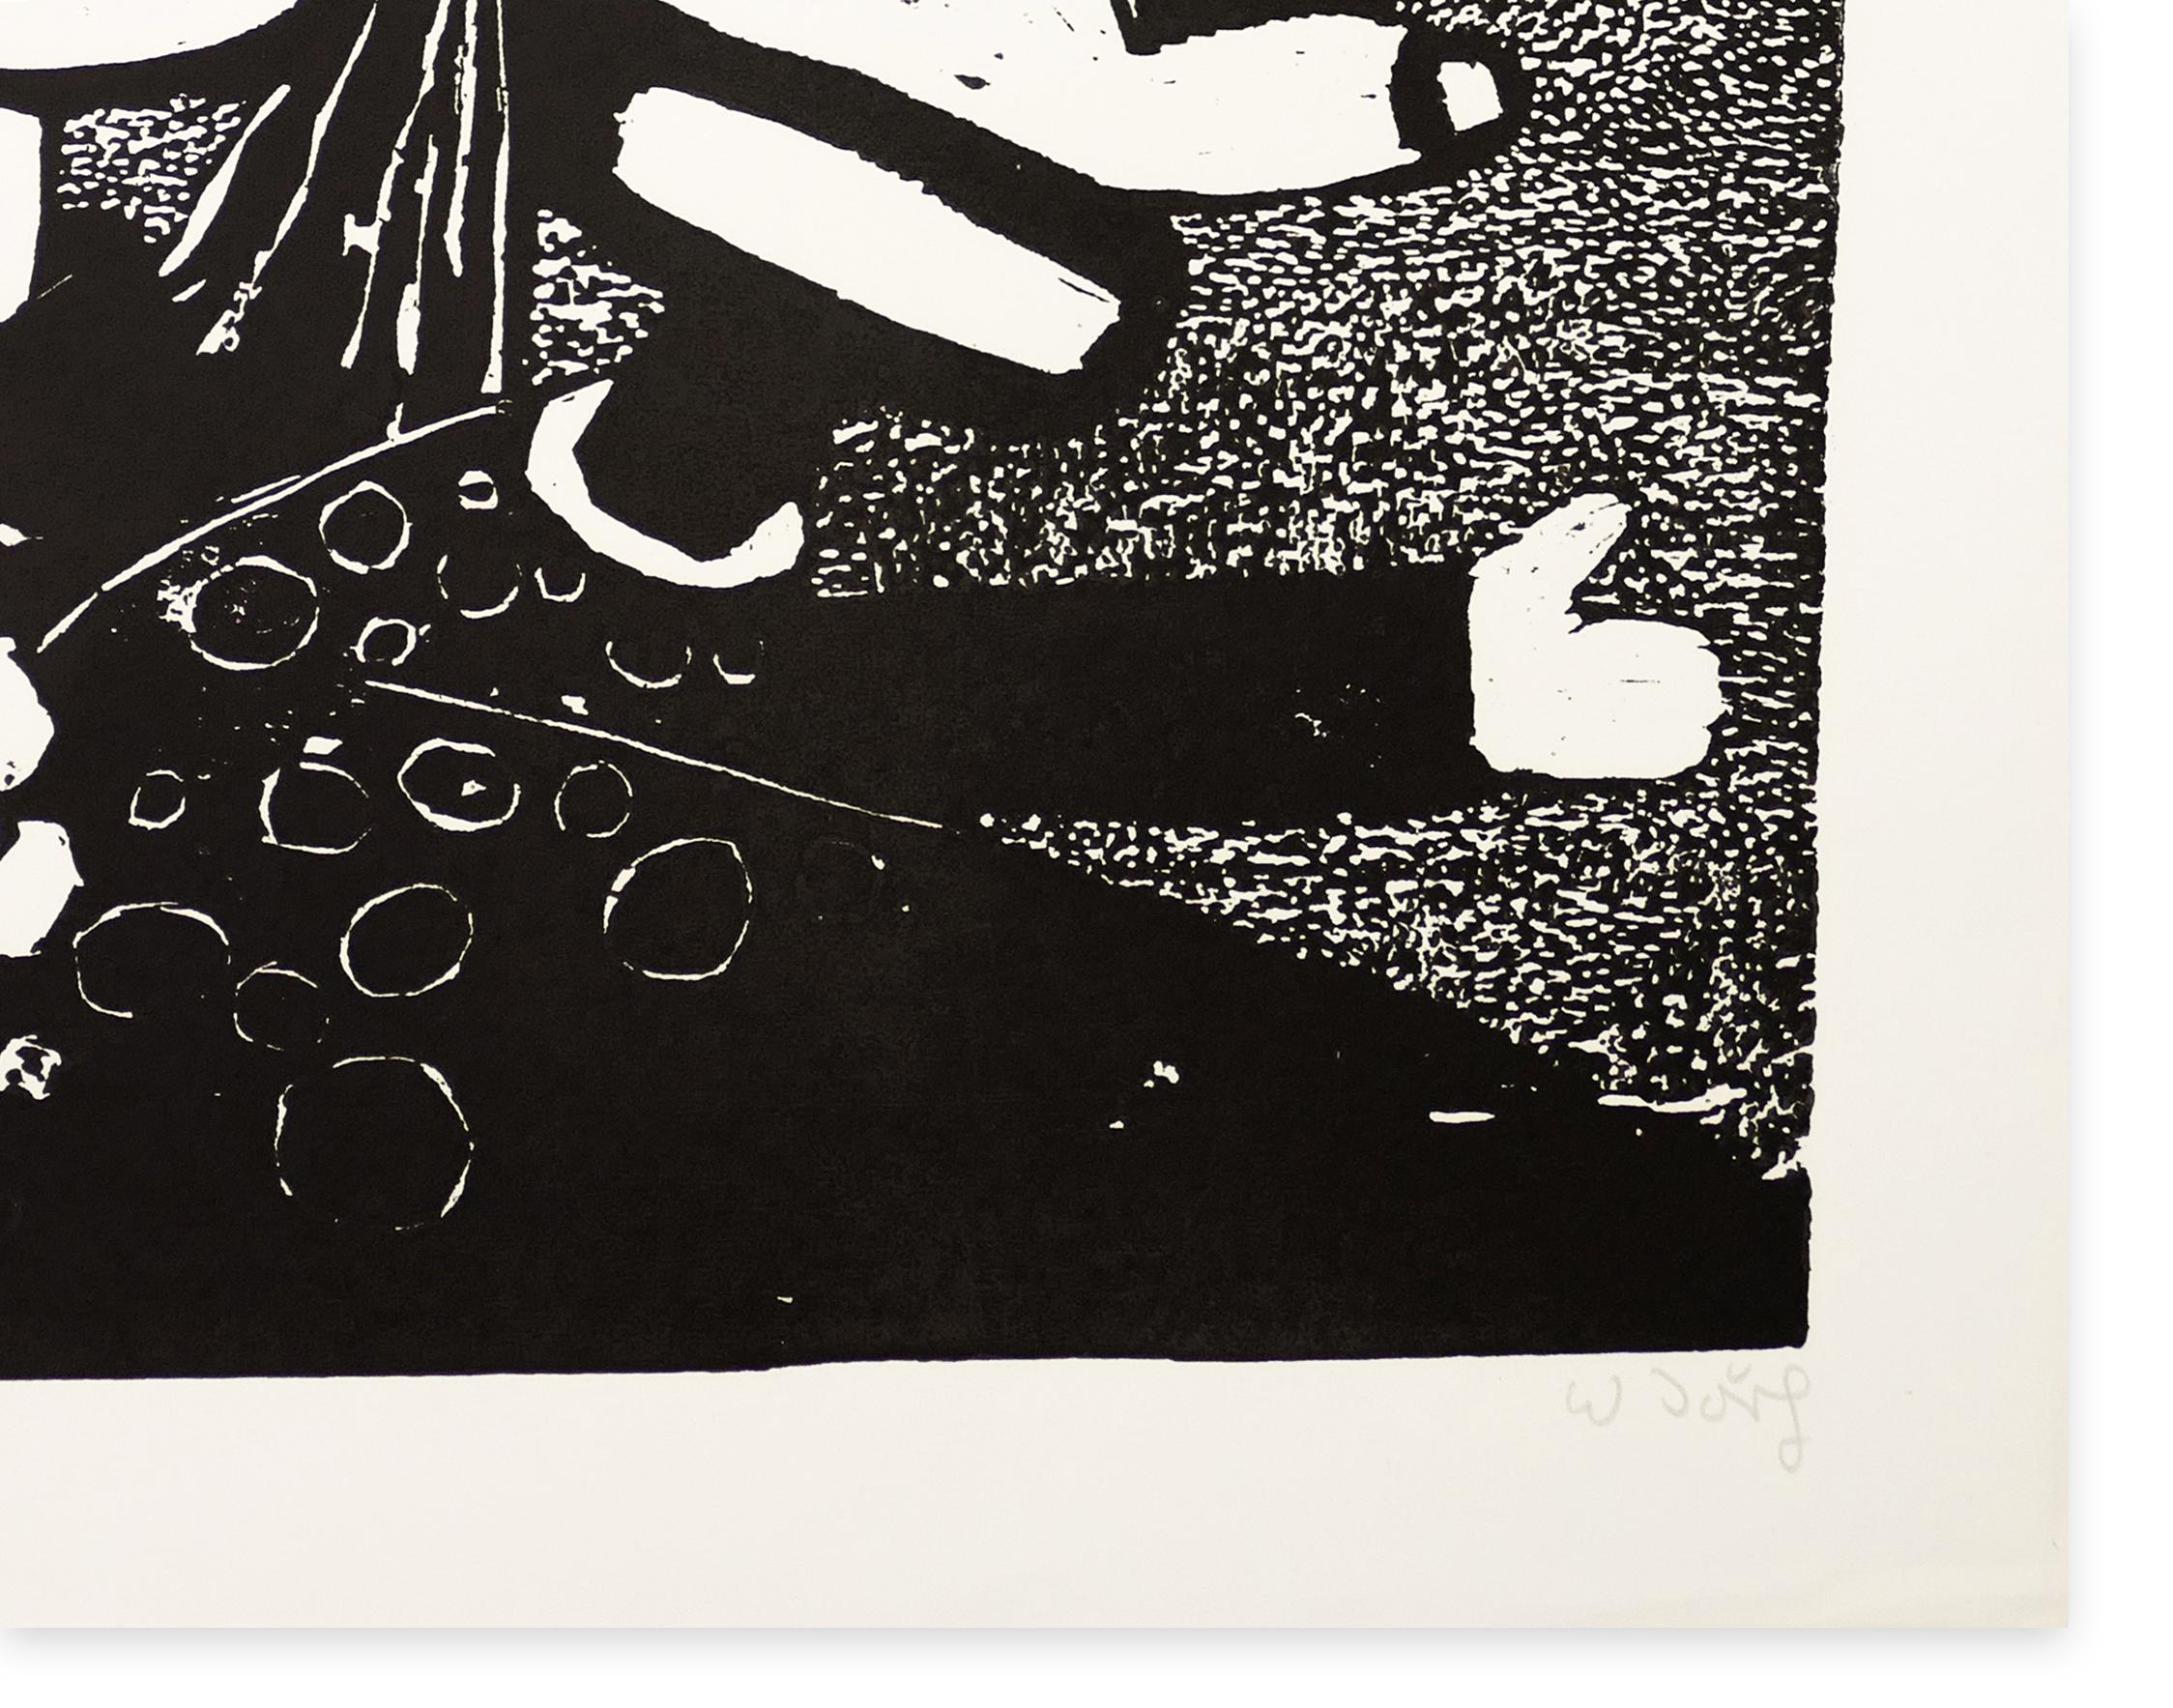 Puppen is an original black and white serigraph on paper, realized the German artist Wolfgang Jörg (1934), during the 1970's.  

Signed and numbered in pencil on lower margin, our specimen is from an edition of 100 print.

This contemporary artwork